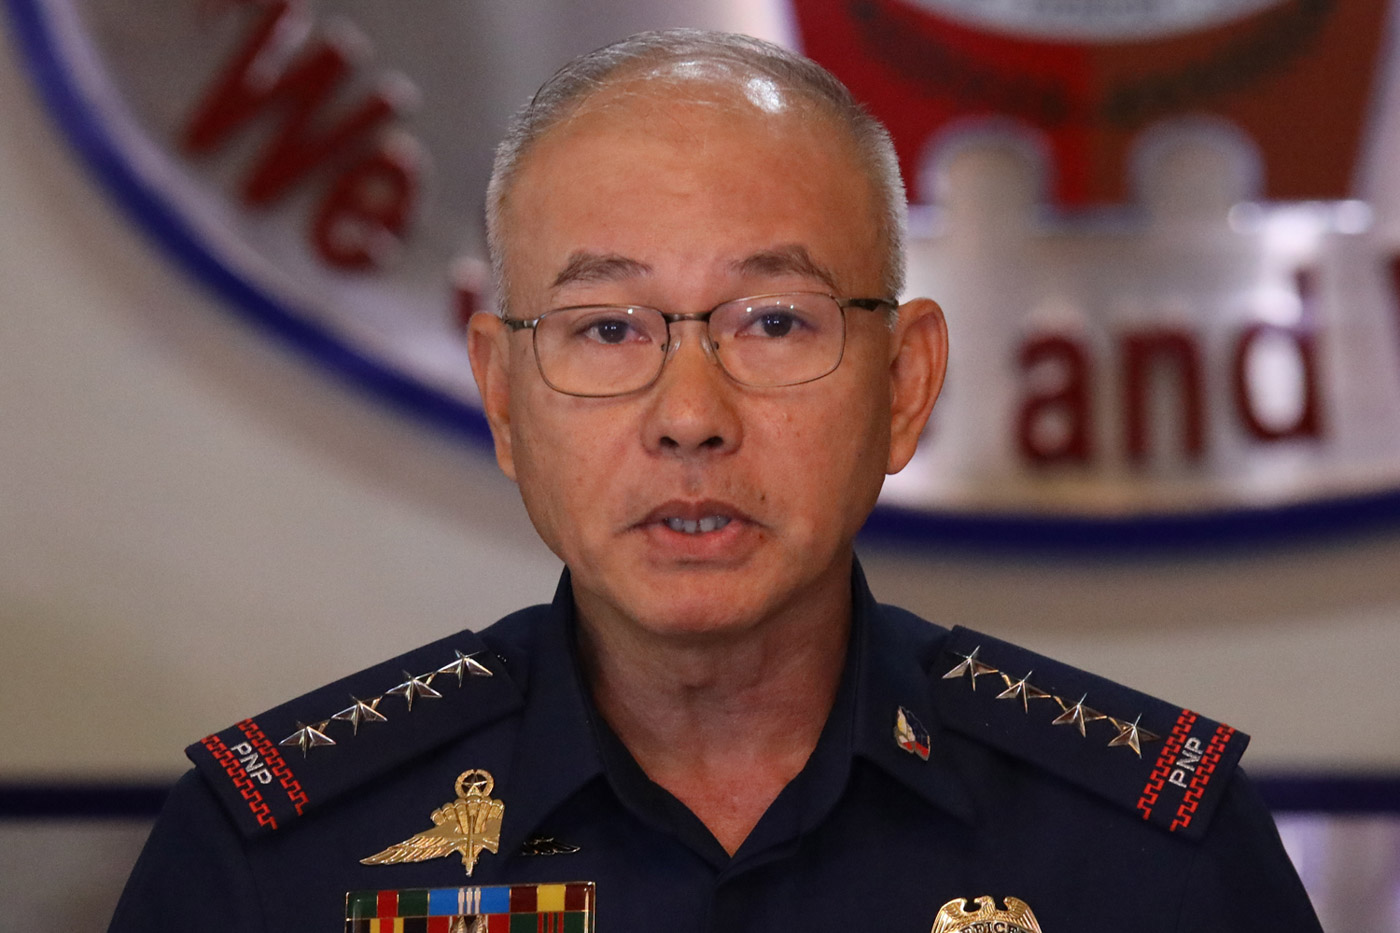 DEATHS 'EXPLAINED.' PNP chief Oscar Albayalde says there were more killings in anti-drug operations in Central Luzon because the region's police commanders were hardworking. File photo by Darren Langit/Rappler  